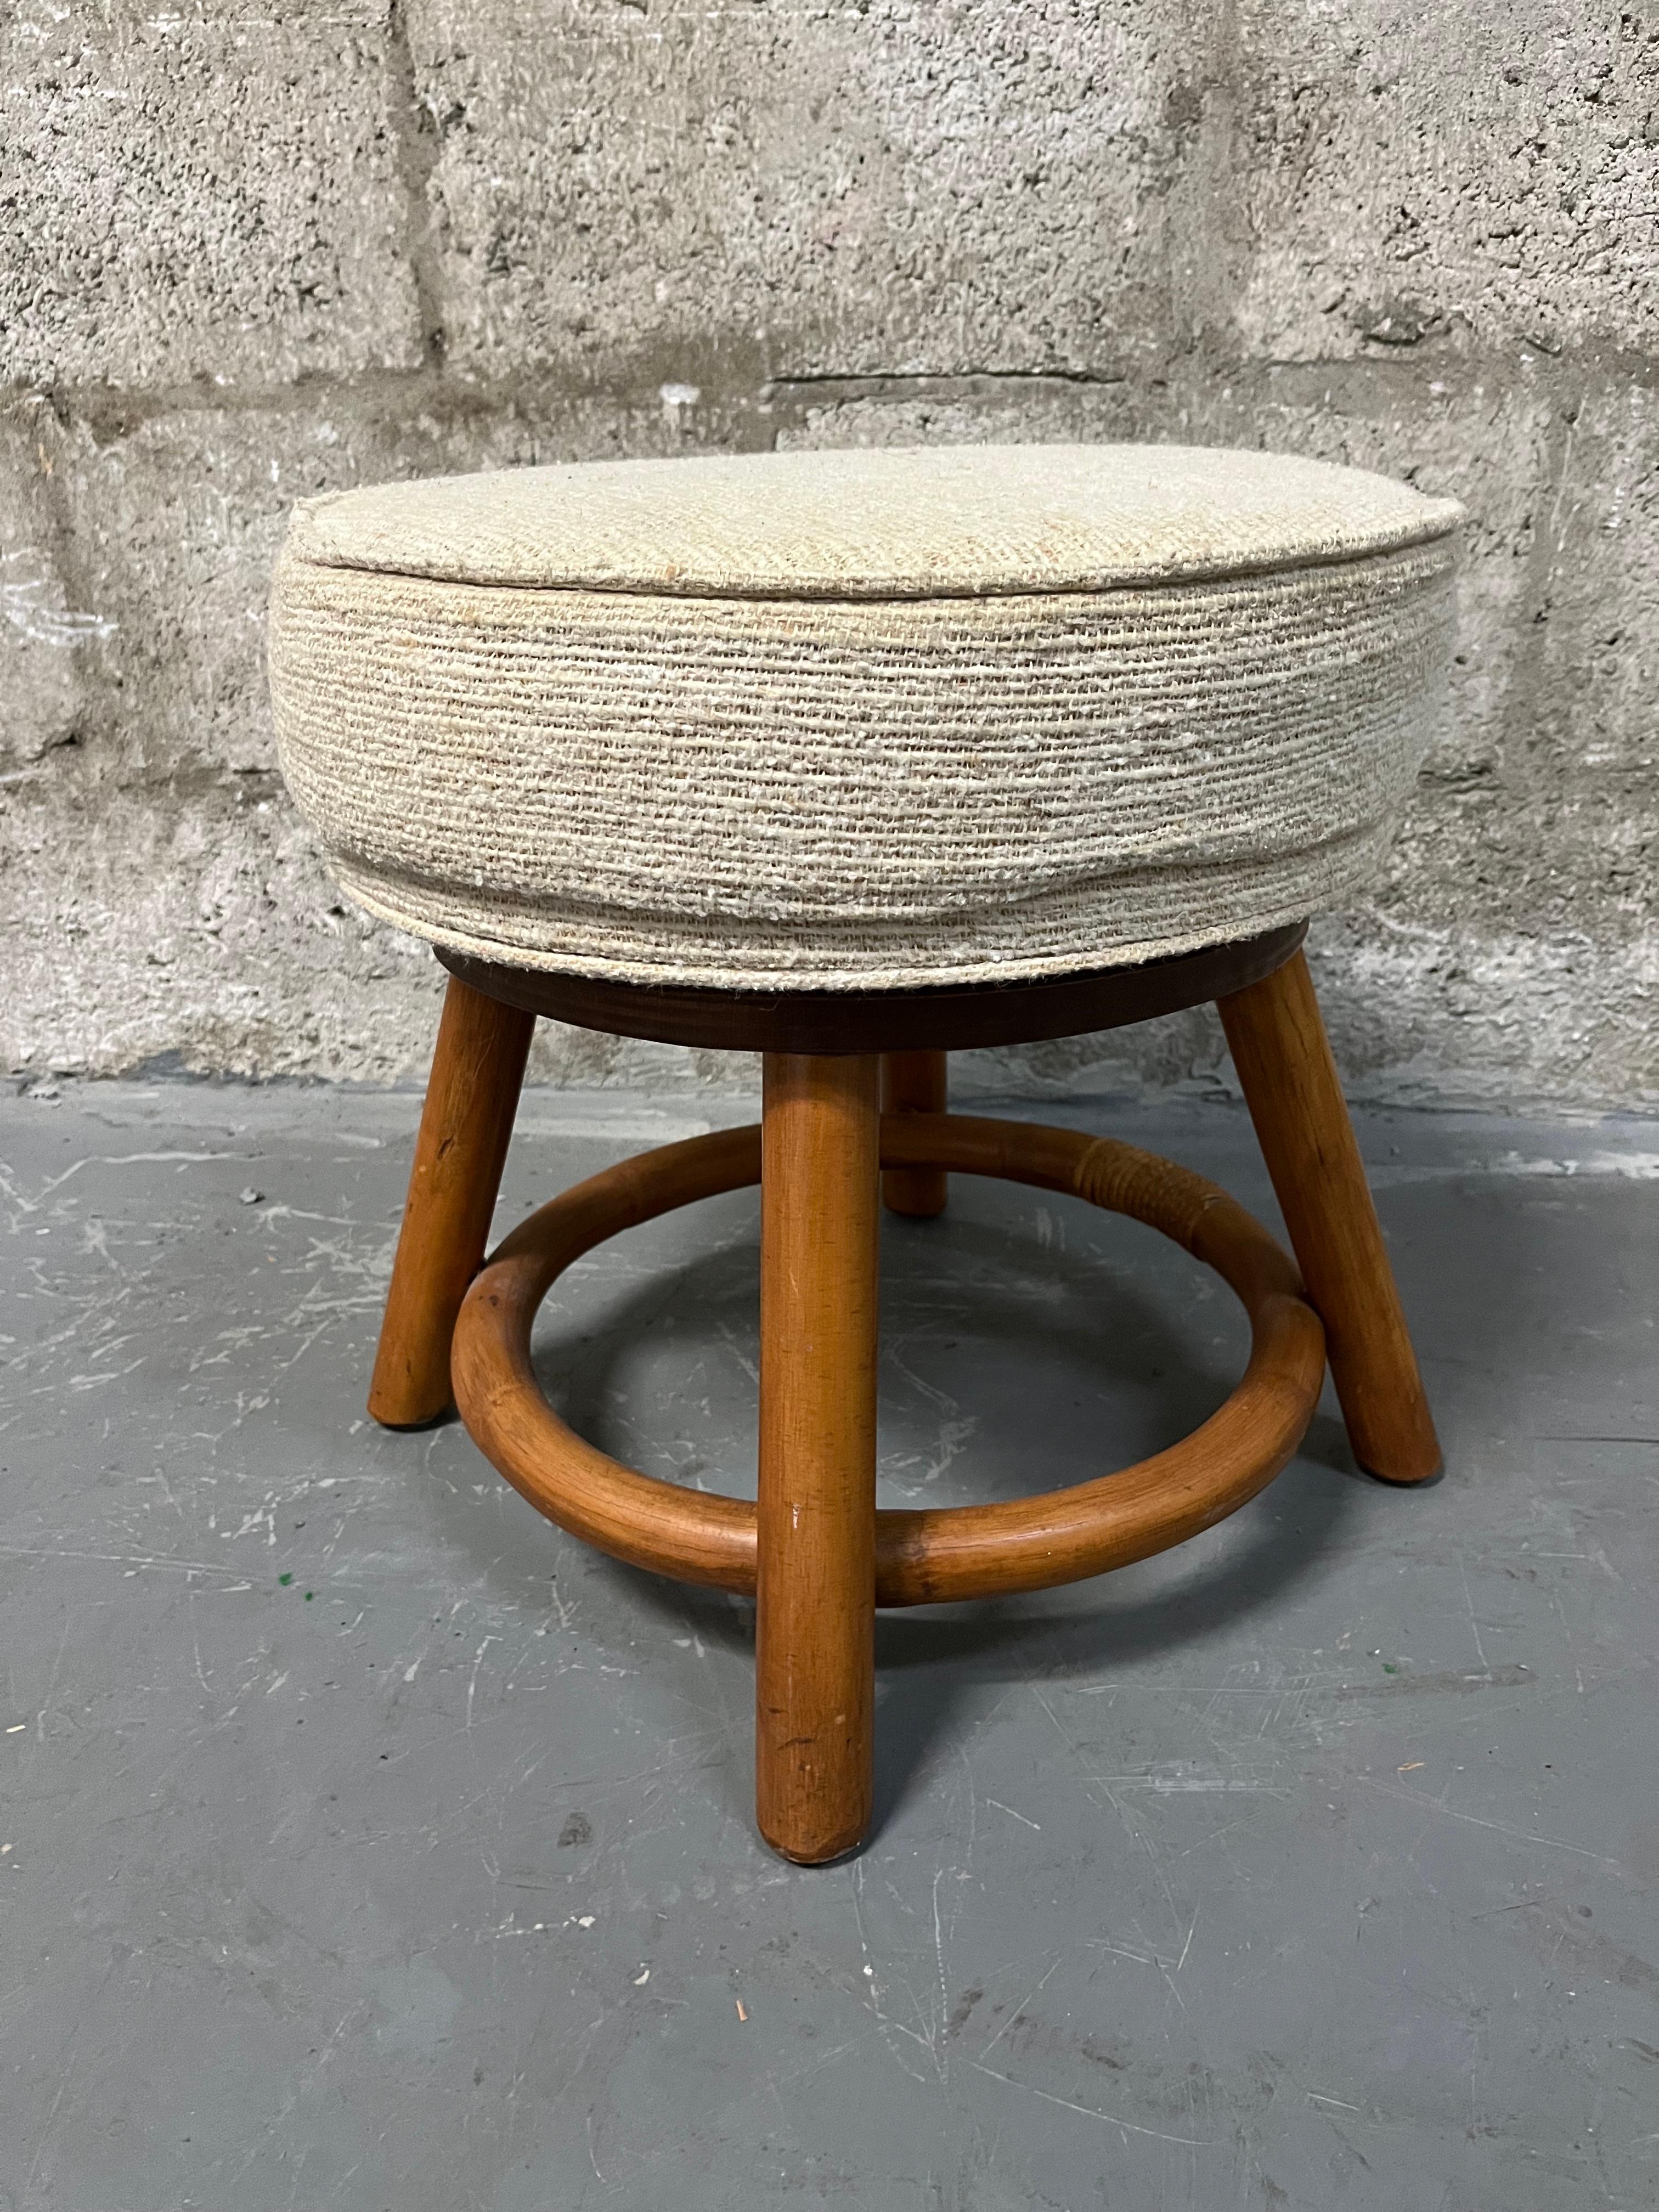 American Bamboo Rattan Wicker Swivel Footstool in the Paul Frankl's Style. Circa 1970s  For Sale